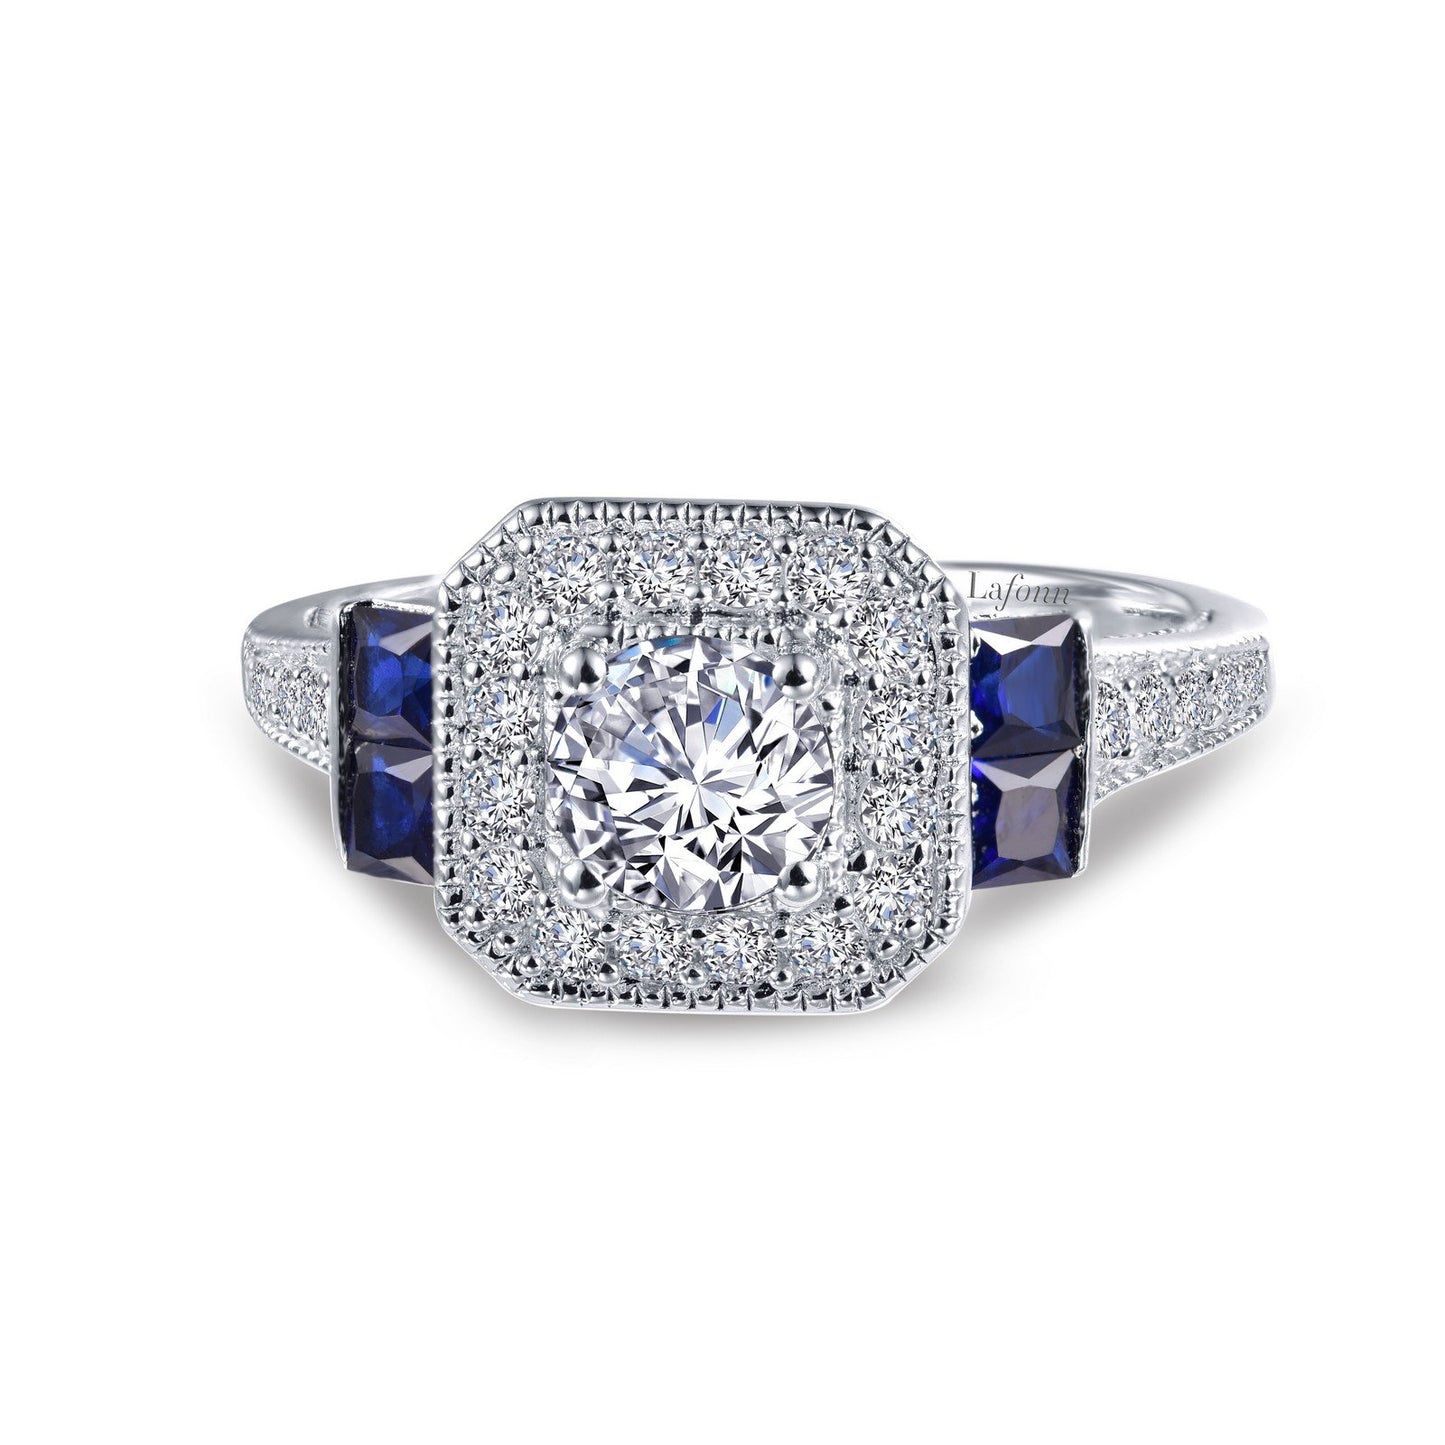 LaFonn Platinum Sapphire  5.00mm Round, Approx. 0.46 CTW RINGS Vintage Inspired Engagement Ring